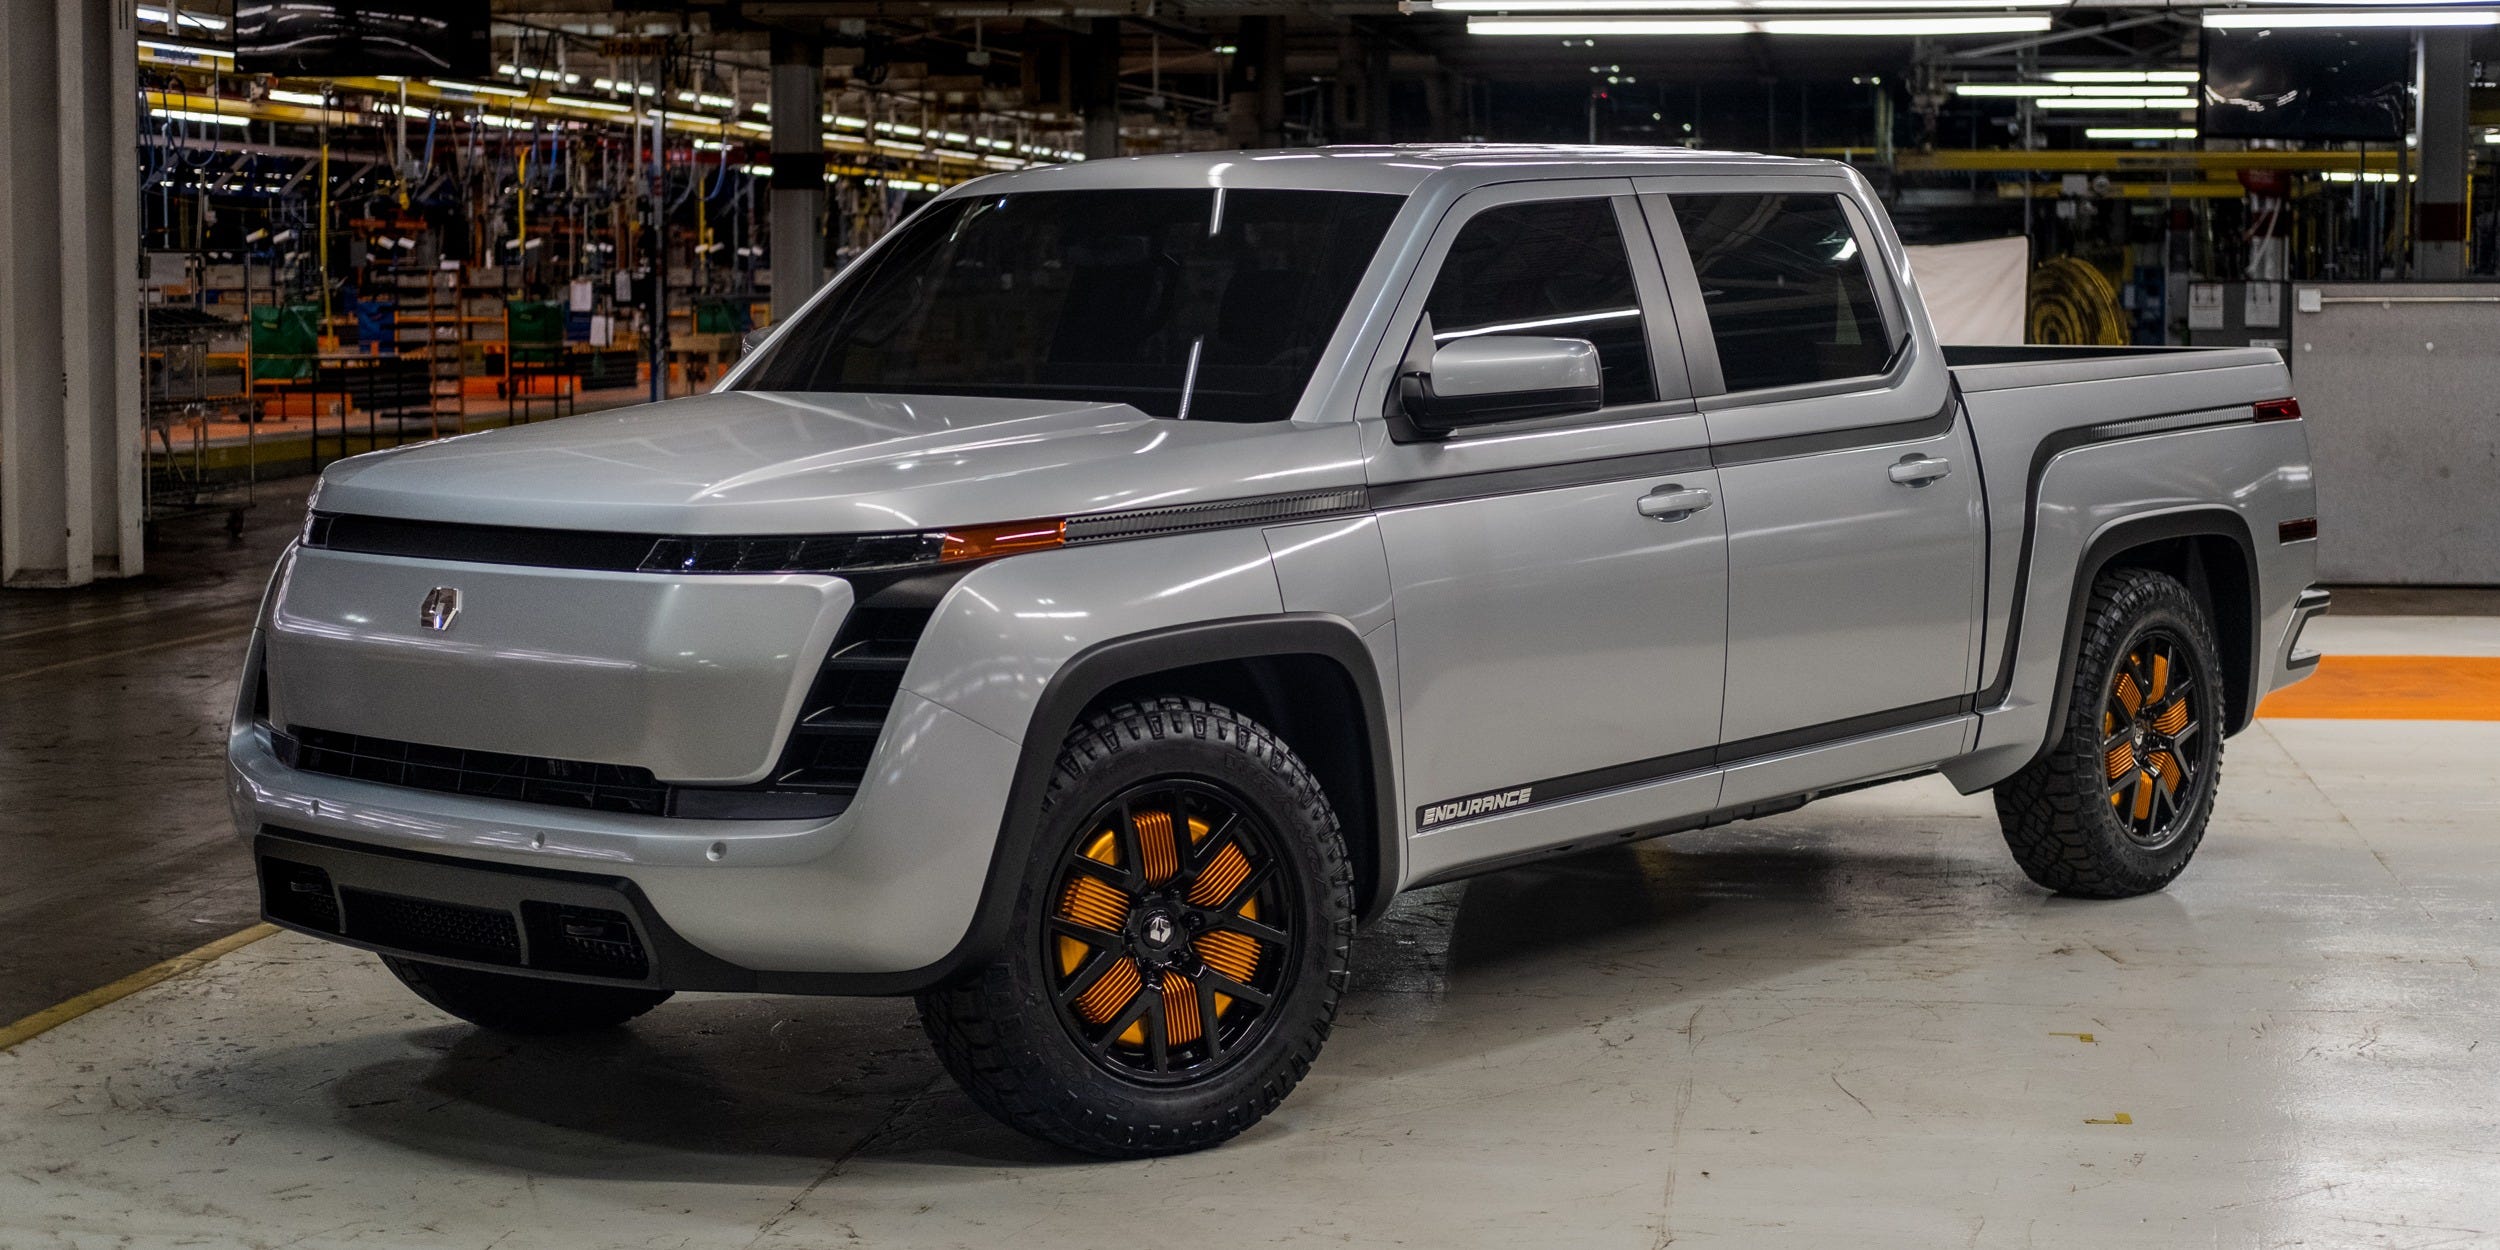 Lordstown Motors has unveiled its $52,500 Endurance truck that’s set to be the first electric pickup to market